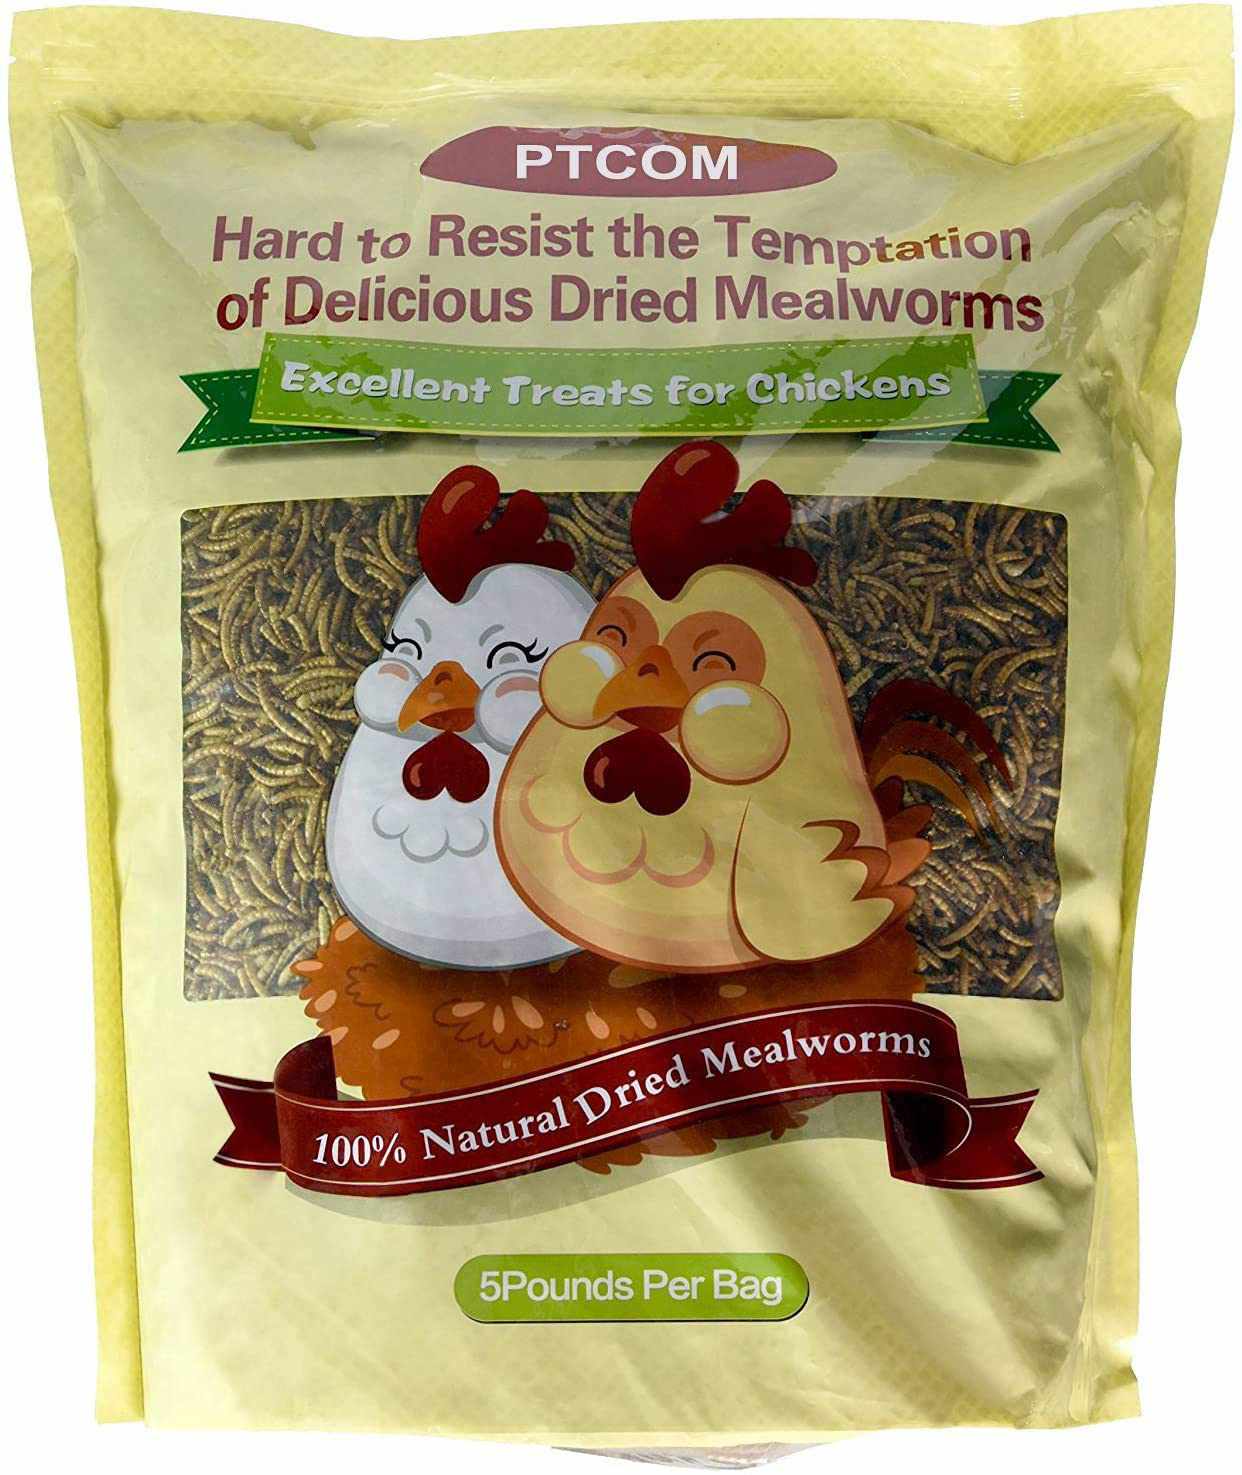 Best Mealworms: Hatortempt 5 lbs Non-GMO Dried Mealworms